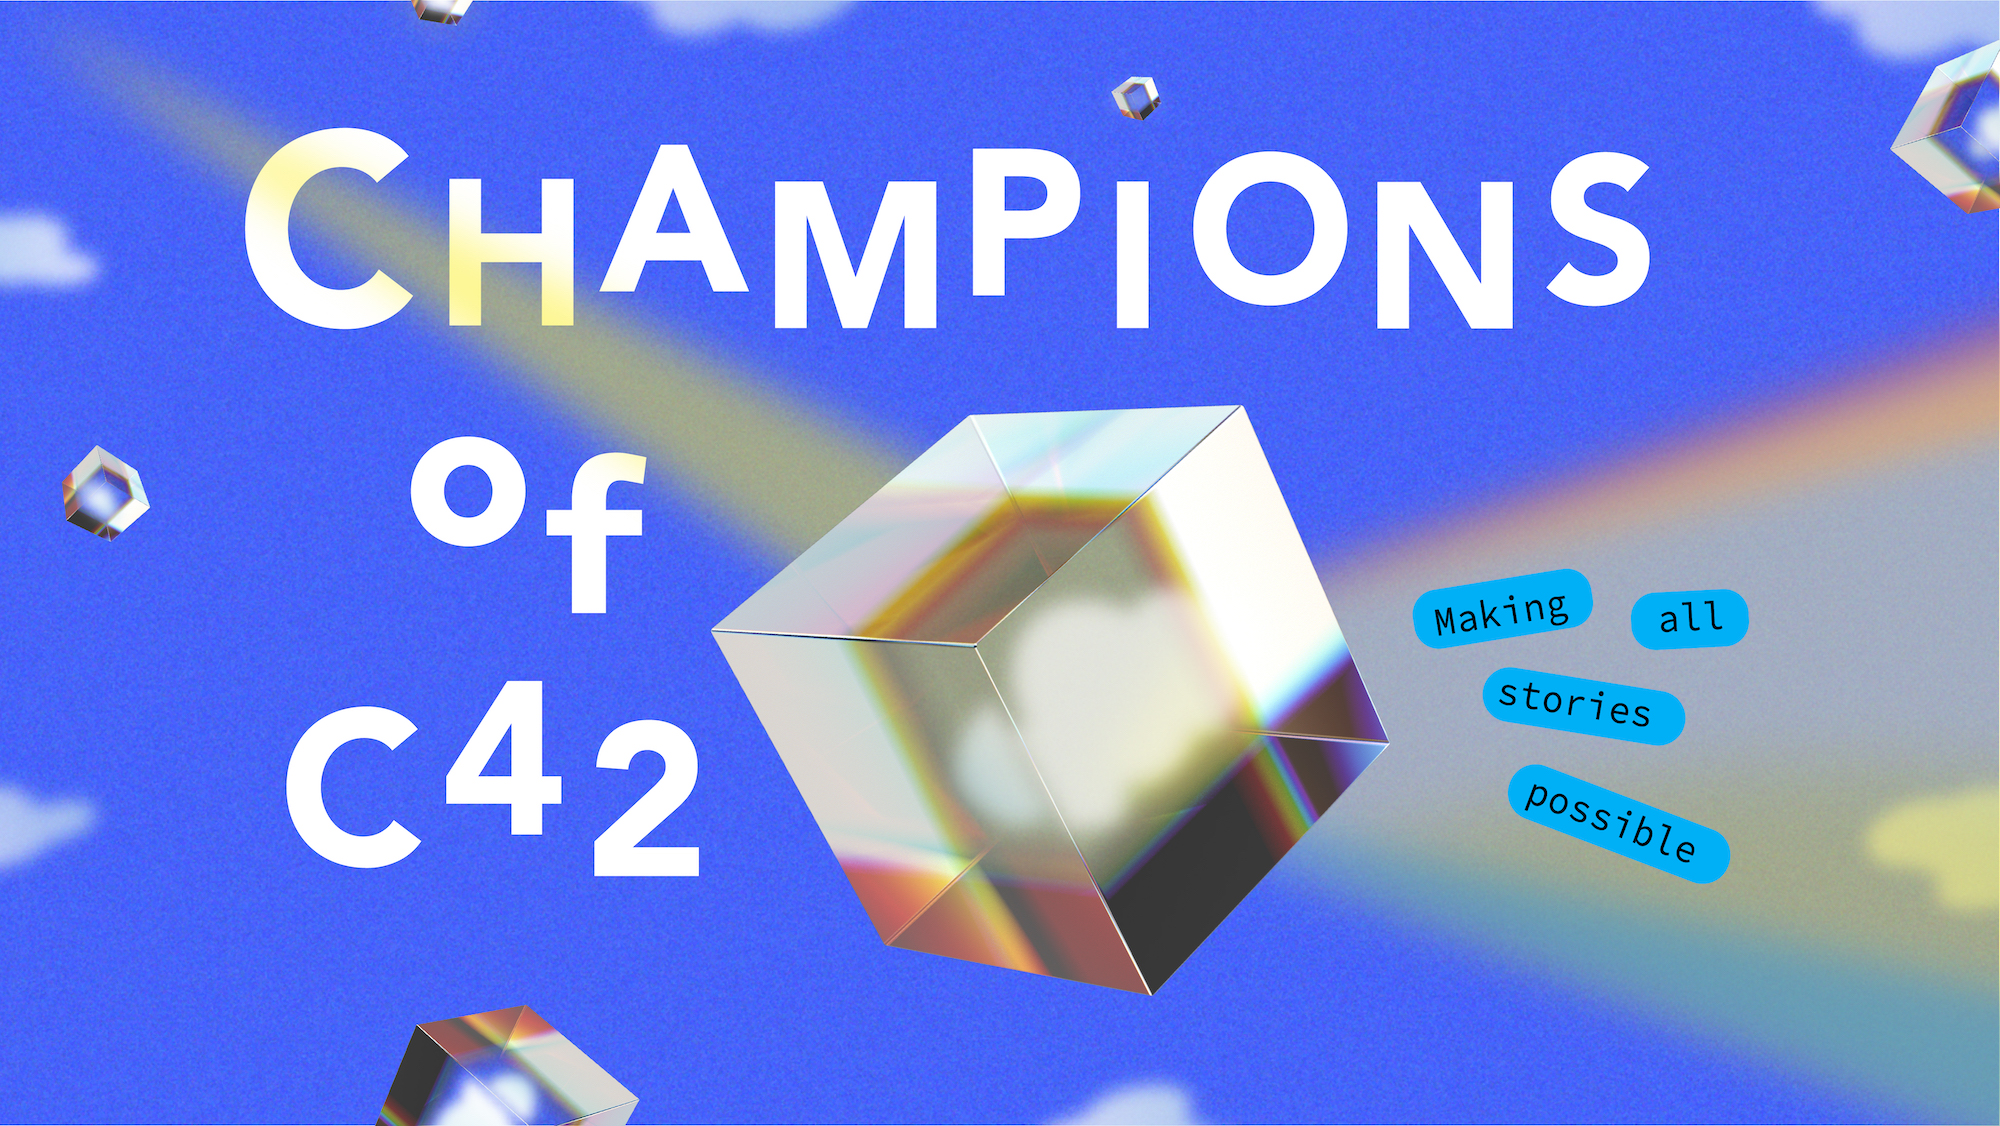 A beam of light shining through a prism, dissolving into a rainbow. To its left are the words 'Champions of C42' in white font against a dark blue background.